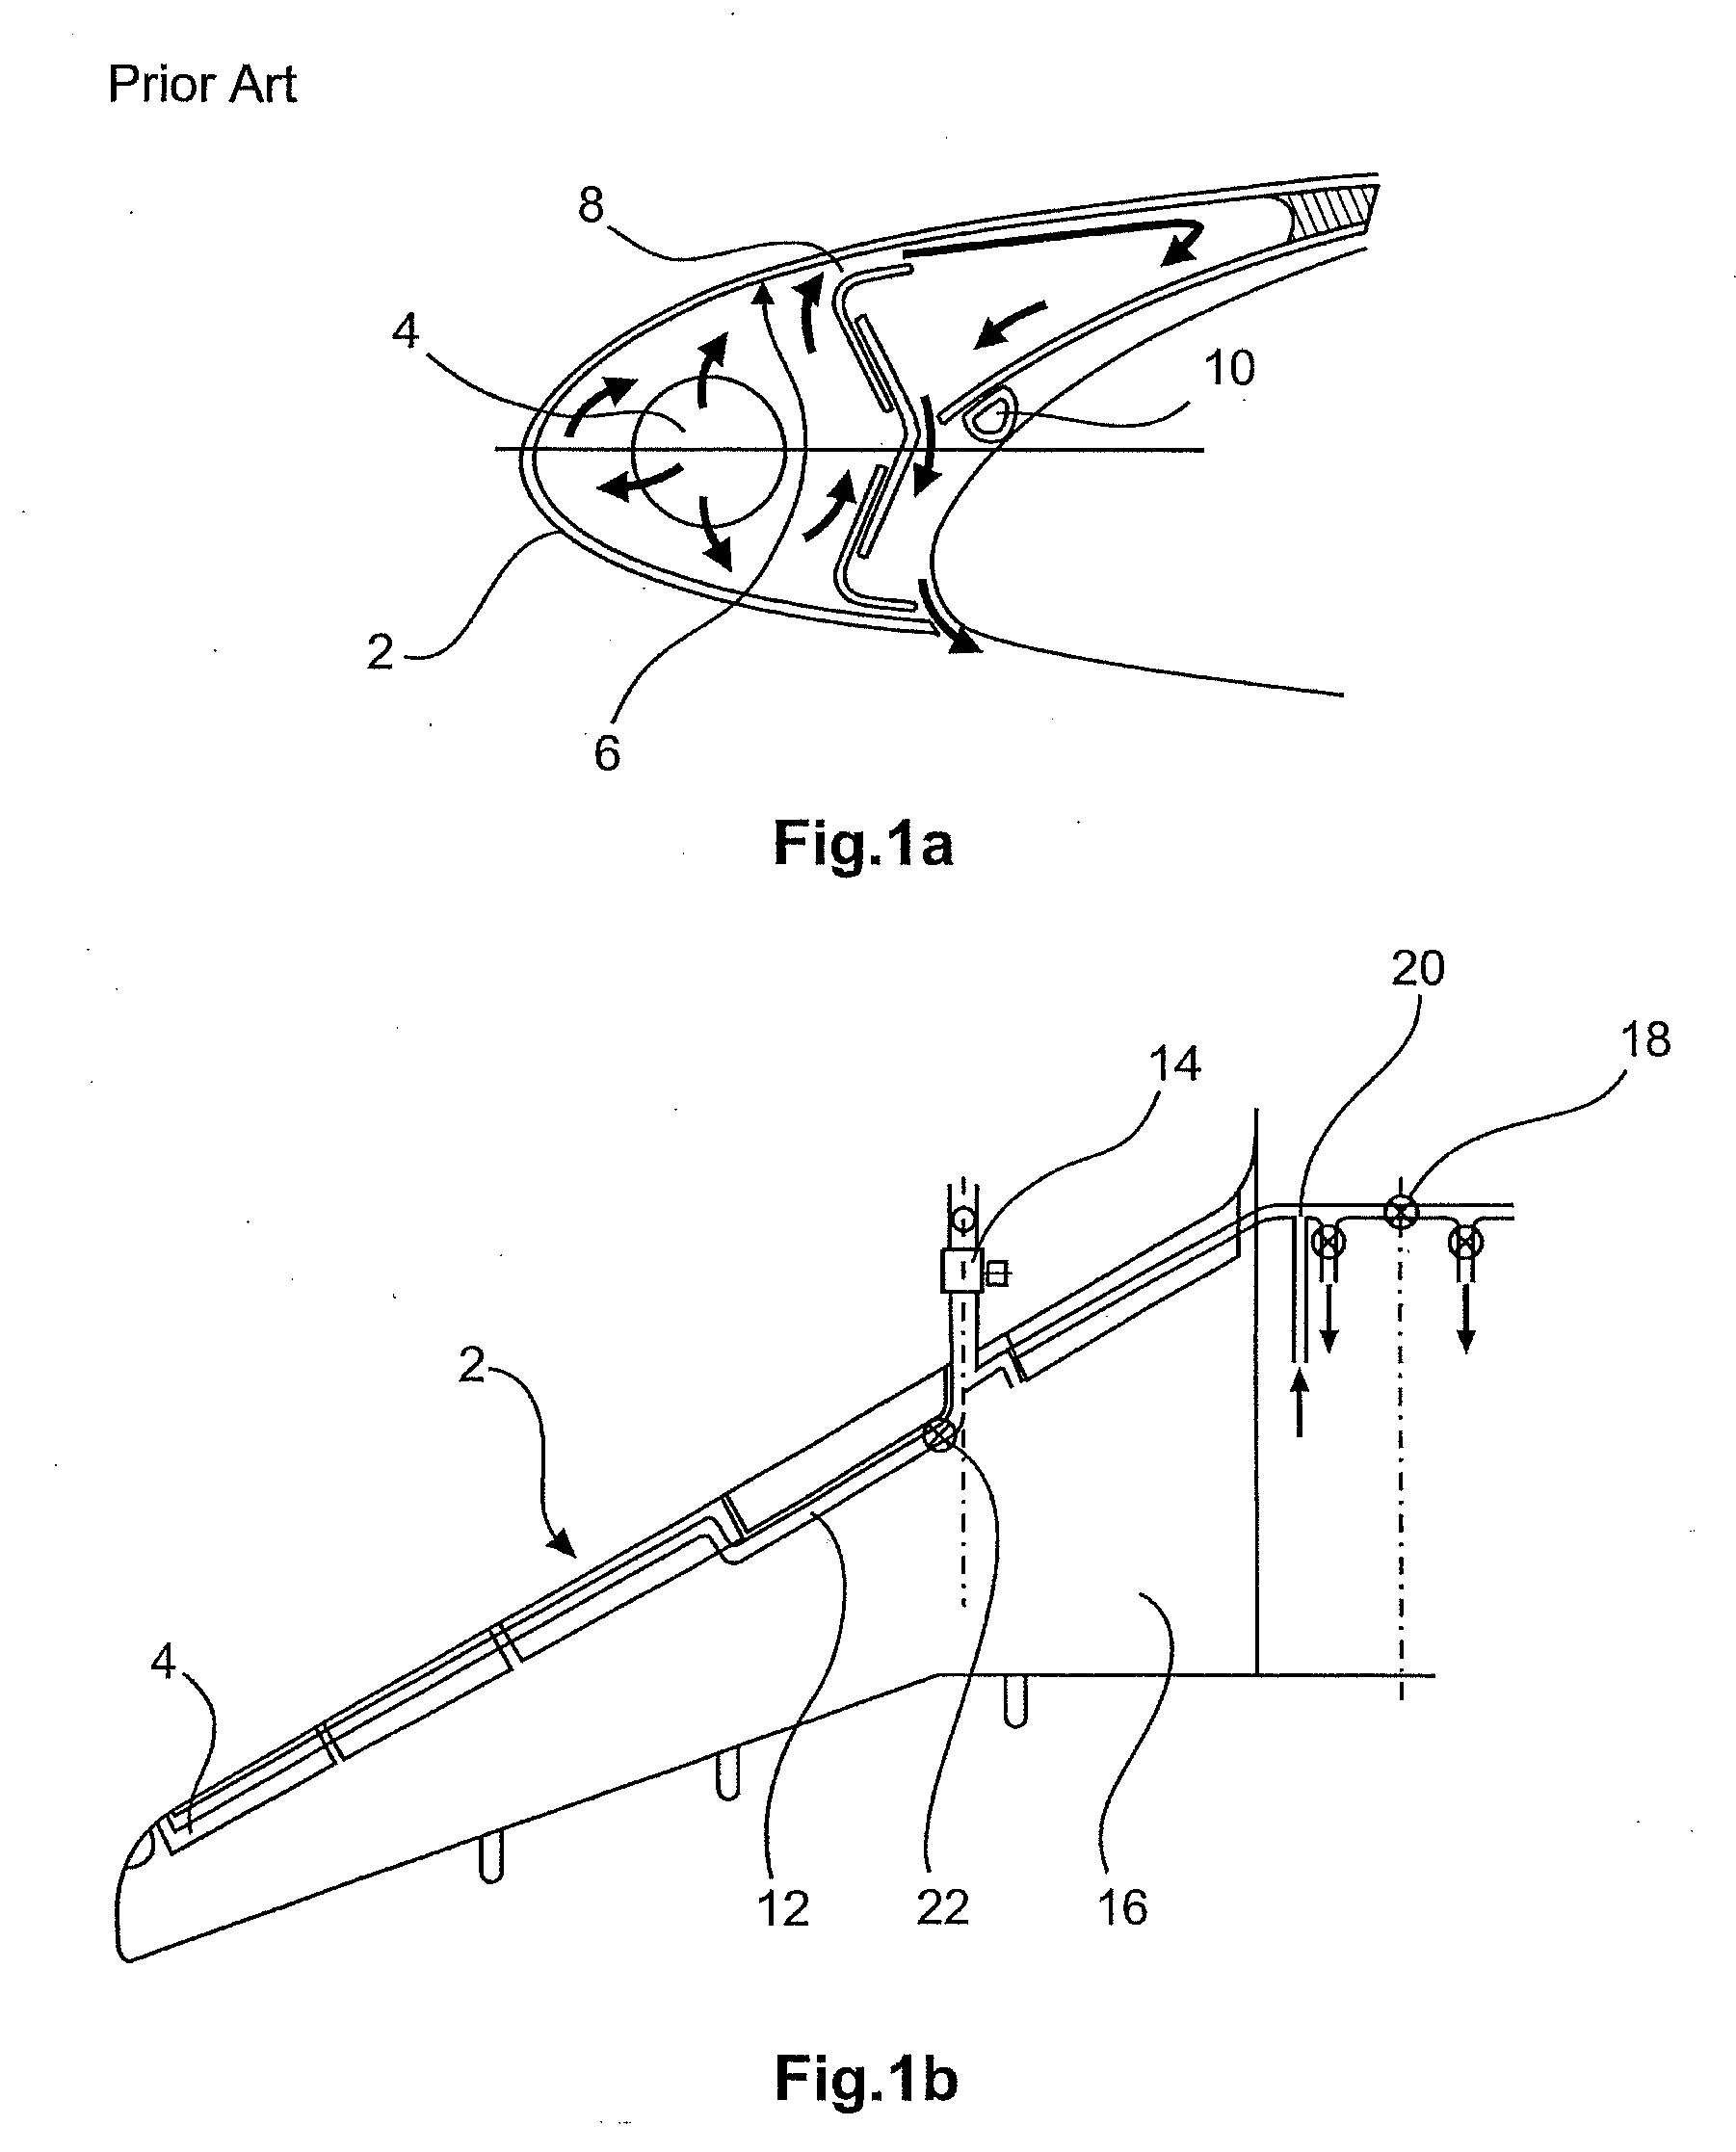 De-icing system for an aircraft